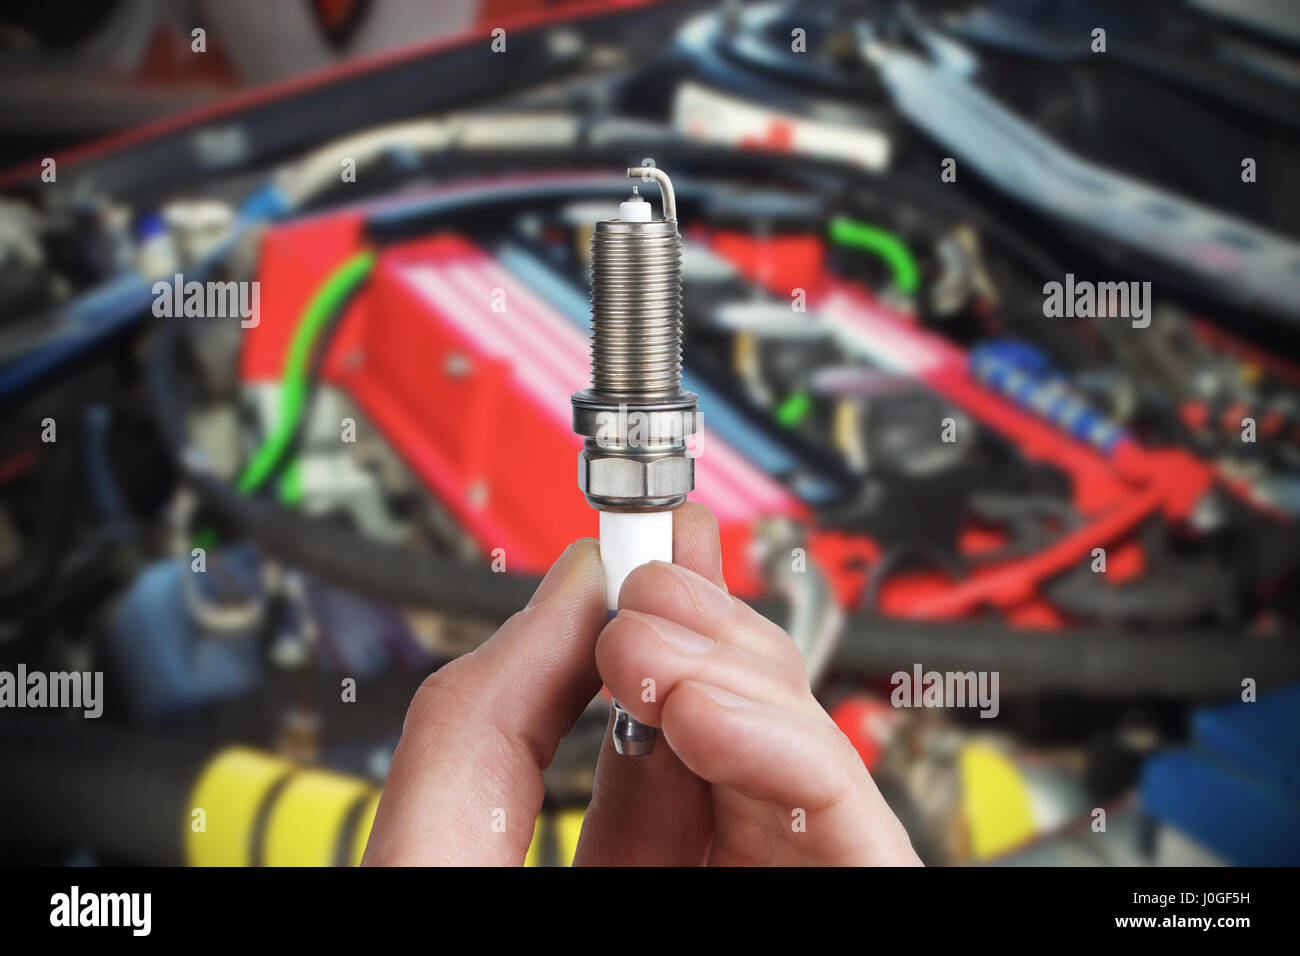 Mechanic holds a spare part spark plug in his hand. Auto part spark plug close-up. Stock Photo